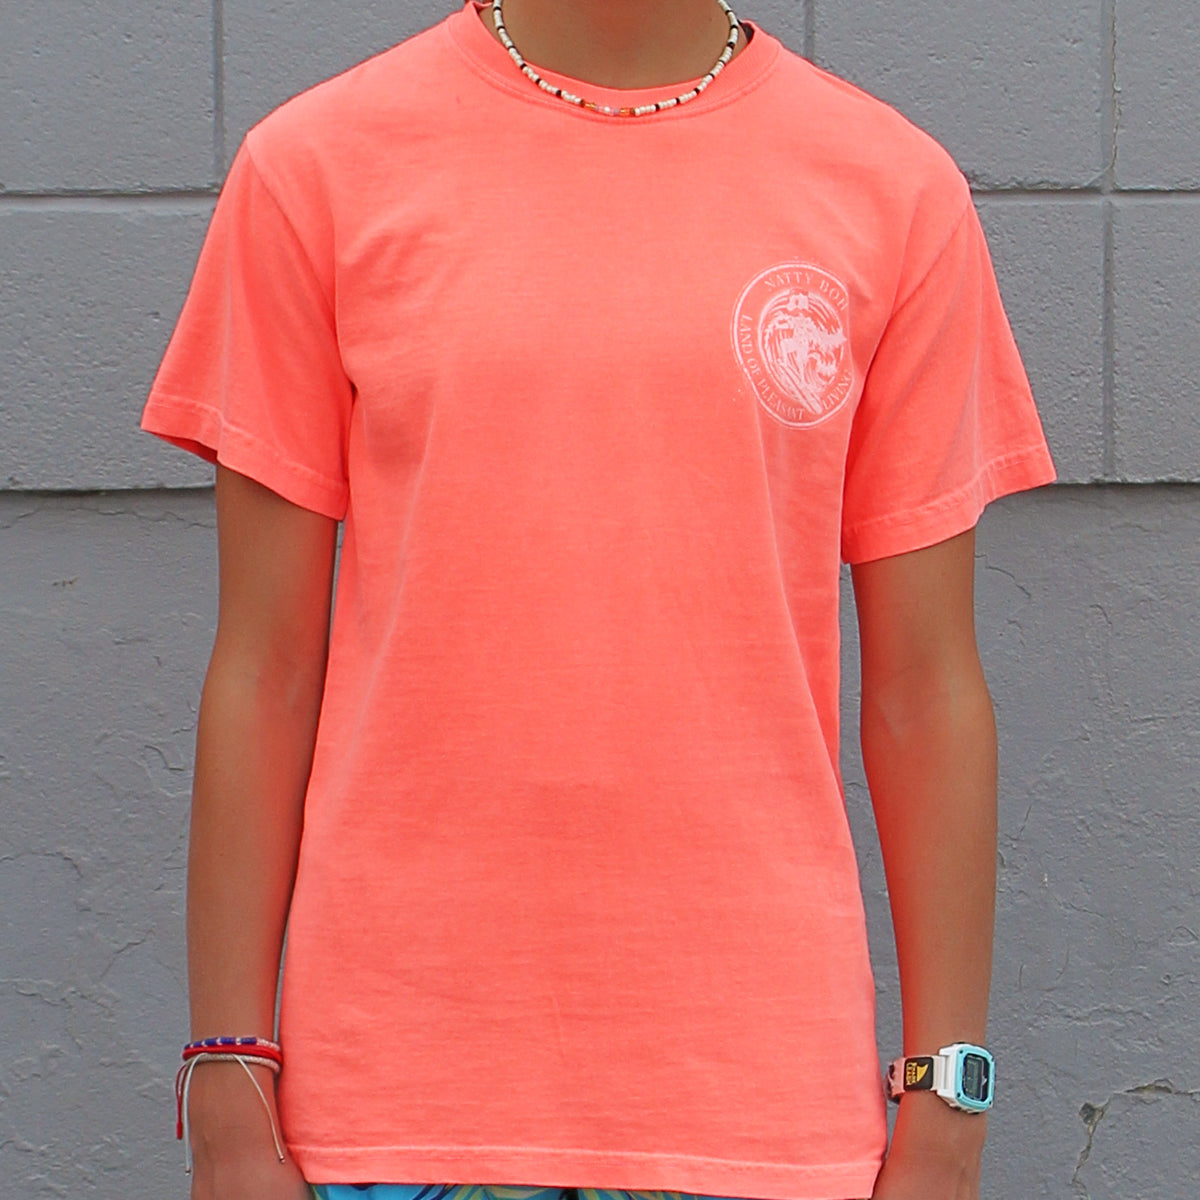 Natty Boh Surfer Dude Land of Pleasant Living (Neon Red Orange) / Shirt - Route One Apparel